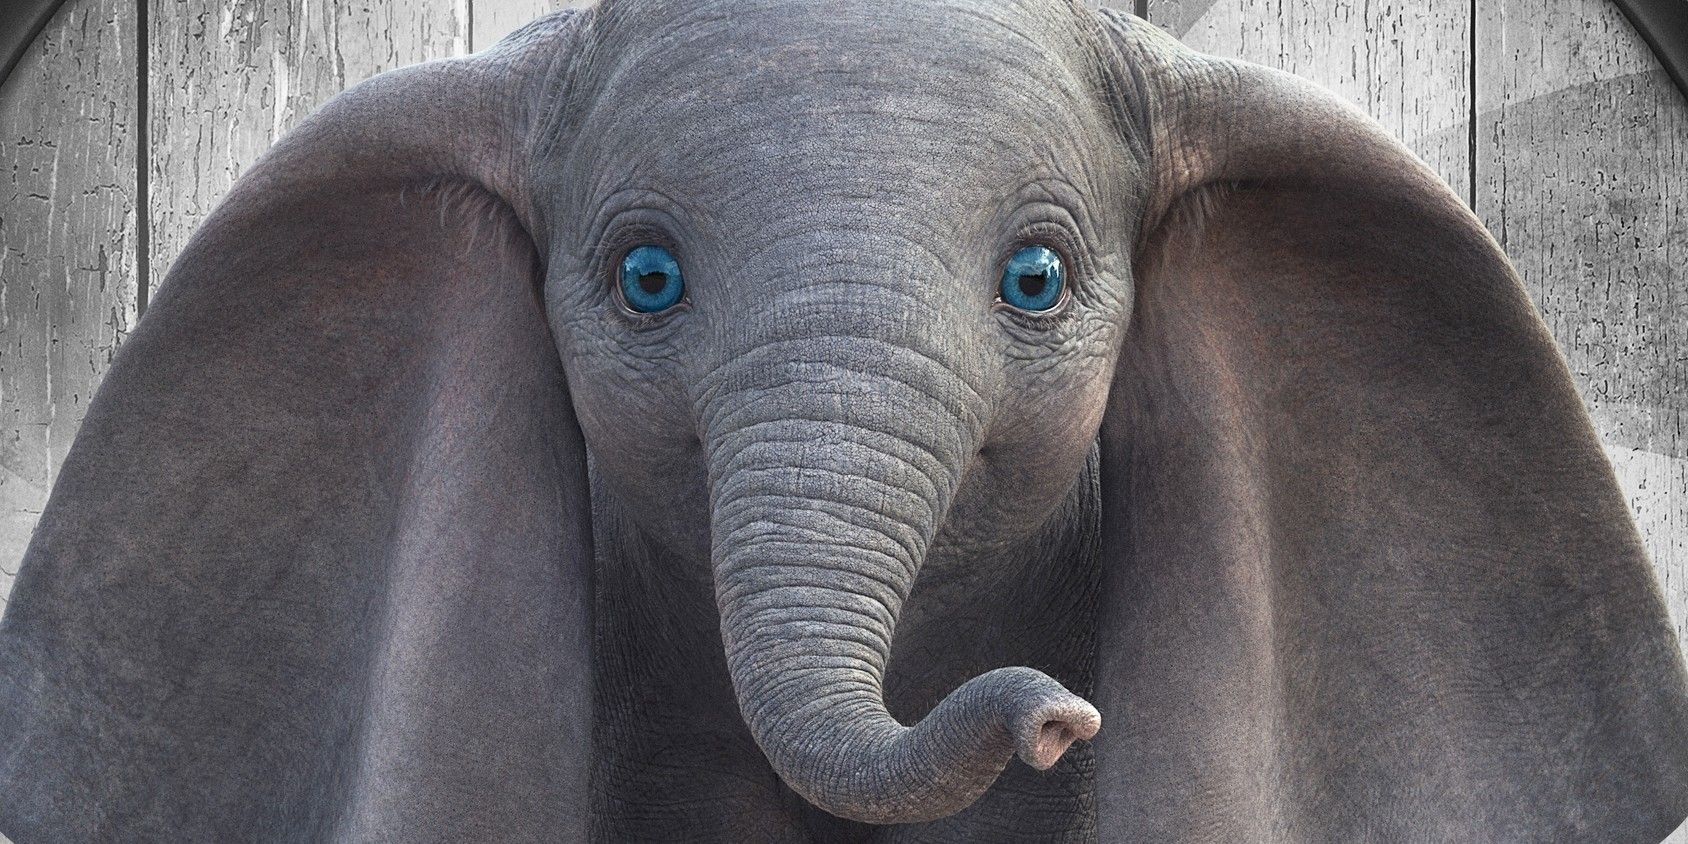 Dumbo as seein in the live-action version